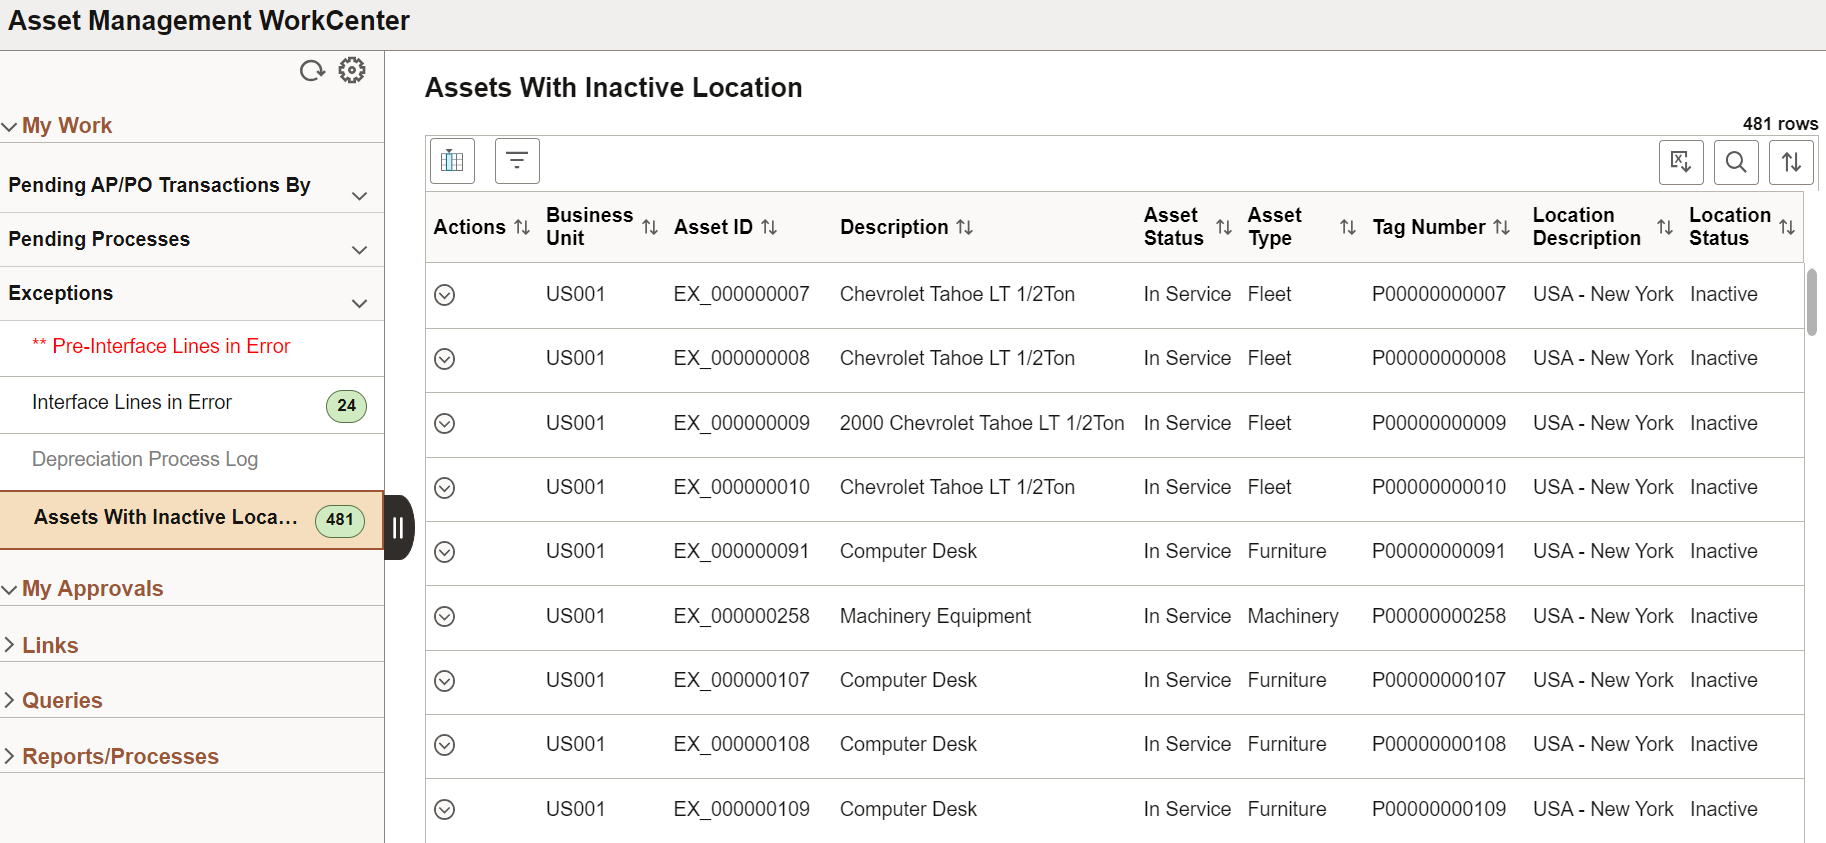 Assets with Inactive Location page